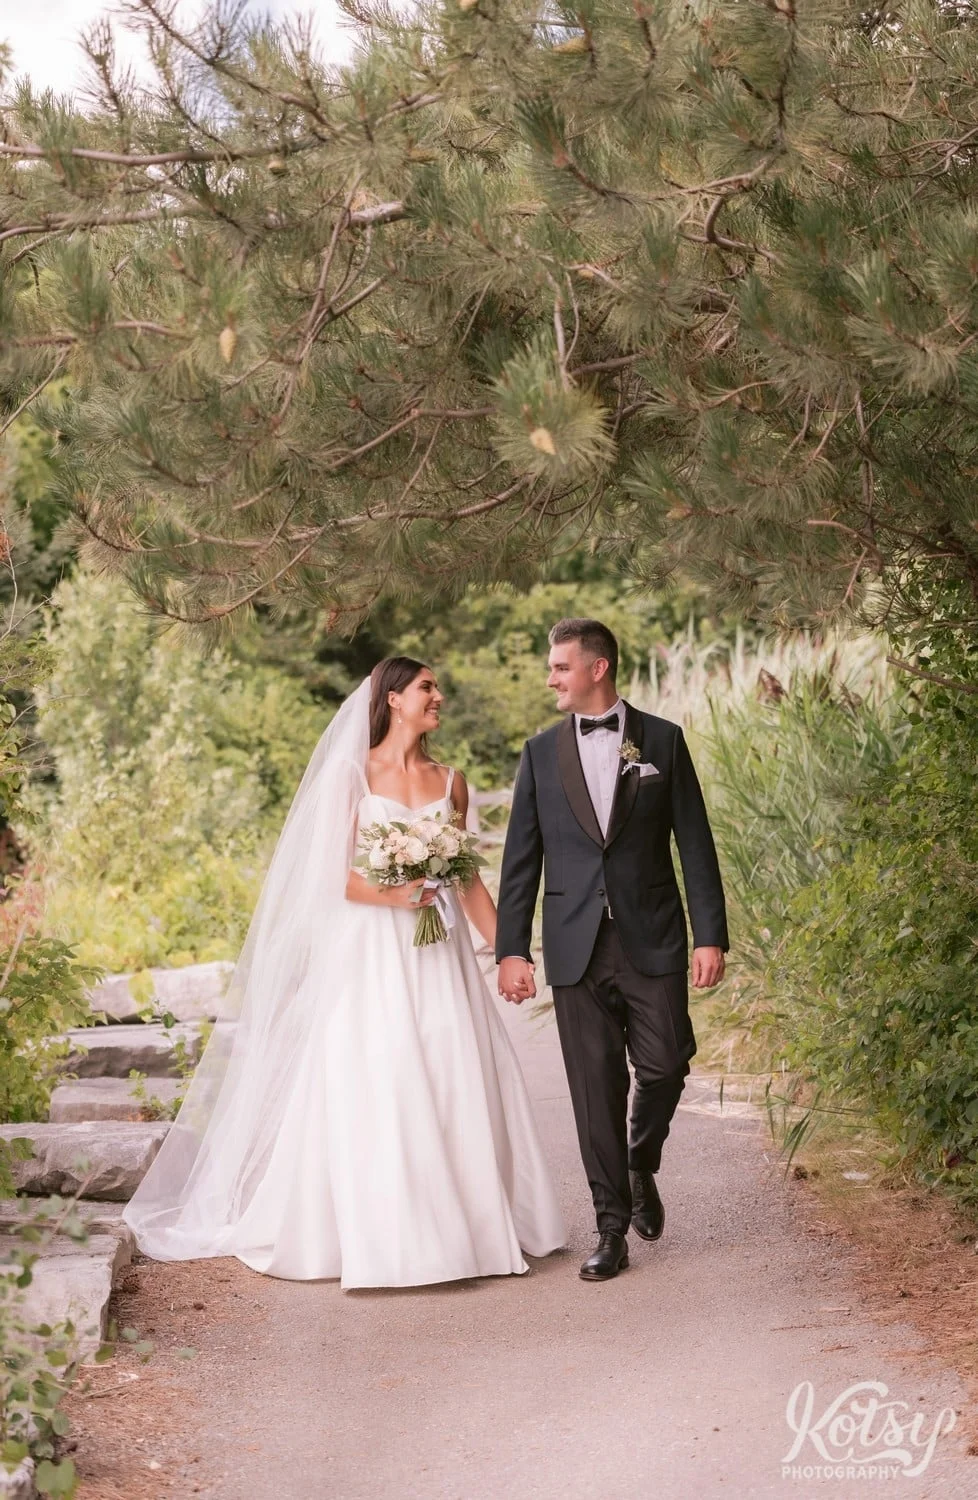 A wide shot of a bride and groom walk on a gravel path while smiling at each other. Photographed at Hunter's Point Wildlife Park in Toronto, Ontario, Canada